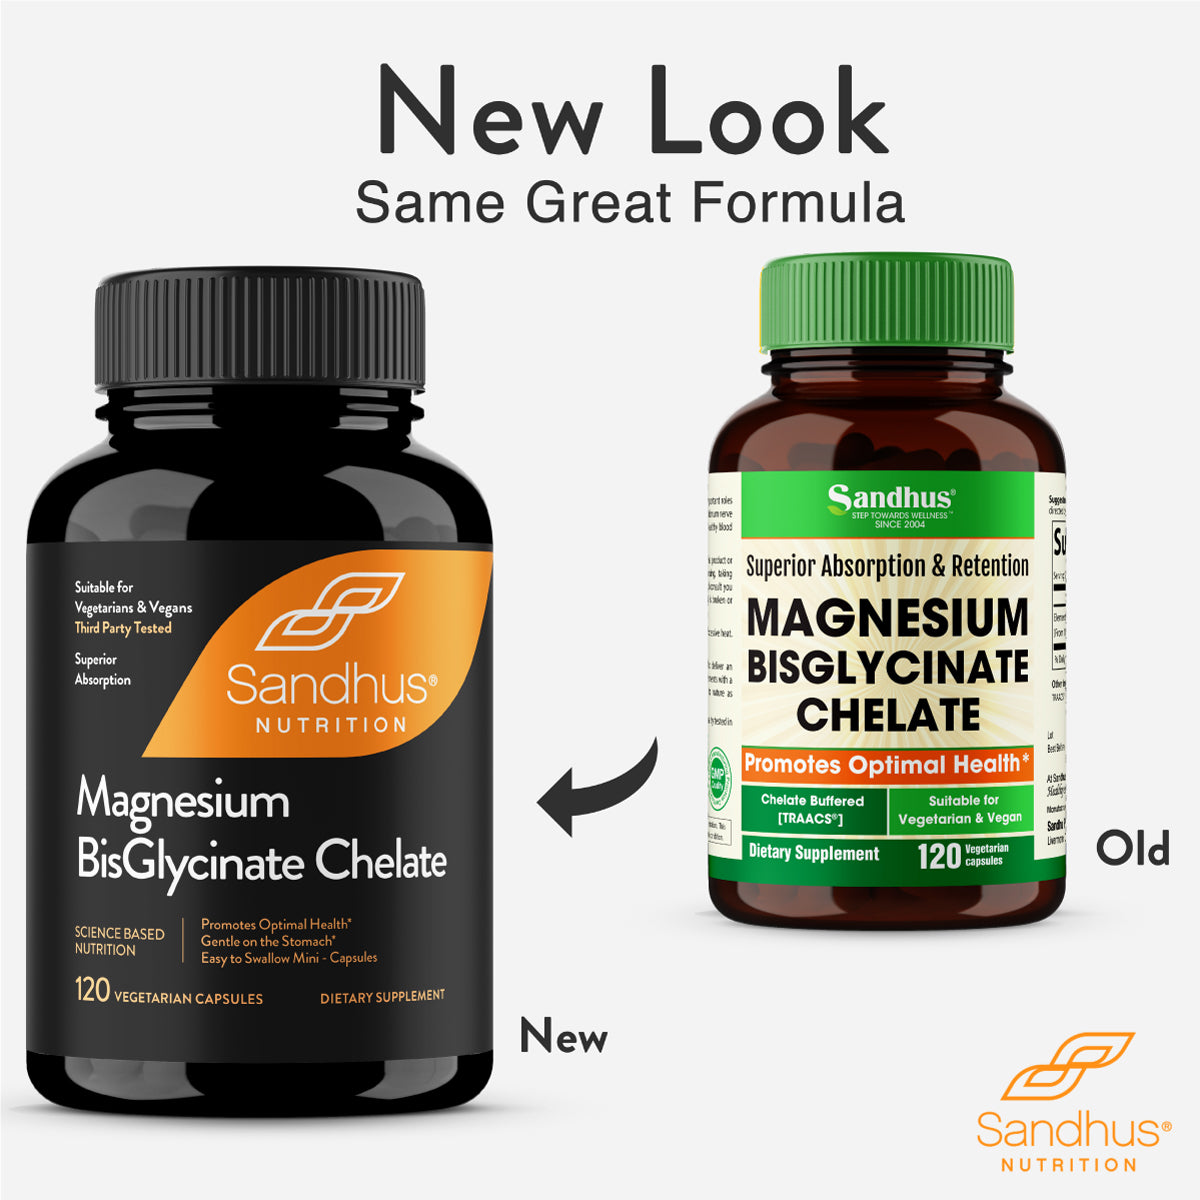 magnesium-bisglycinate-chelate-old-new-bottle